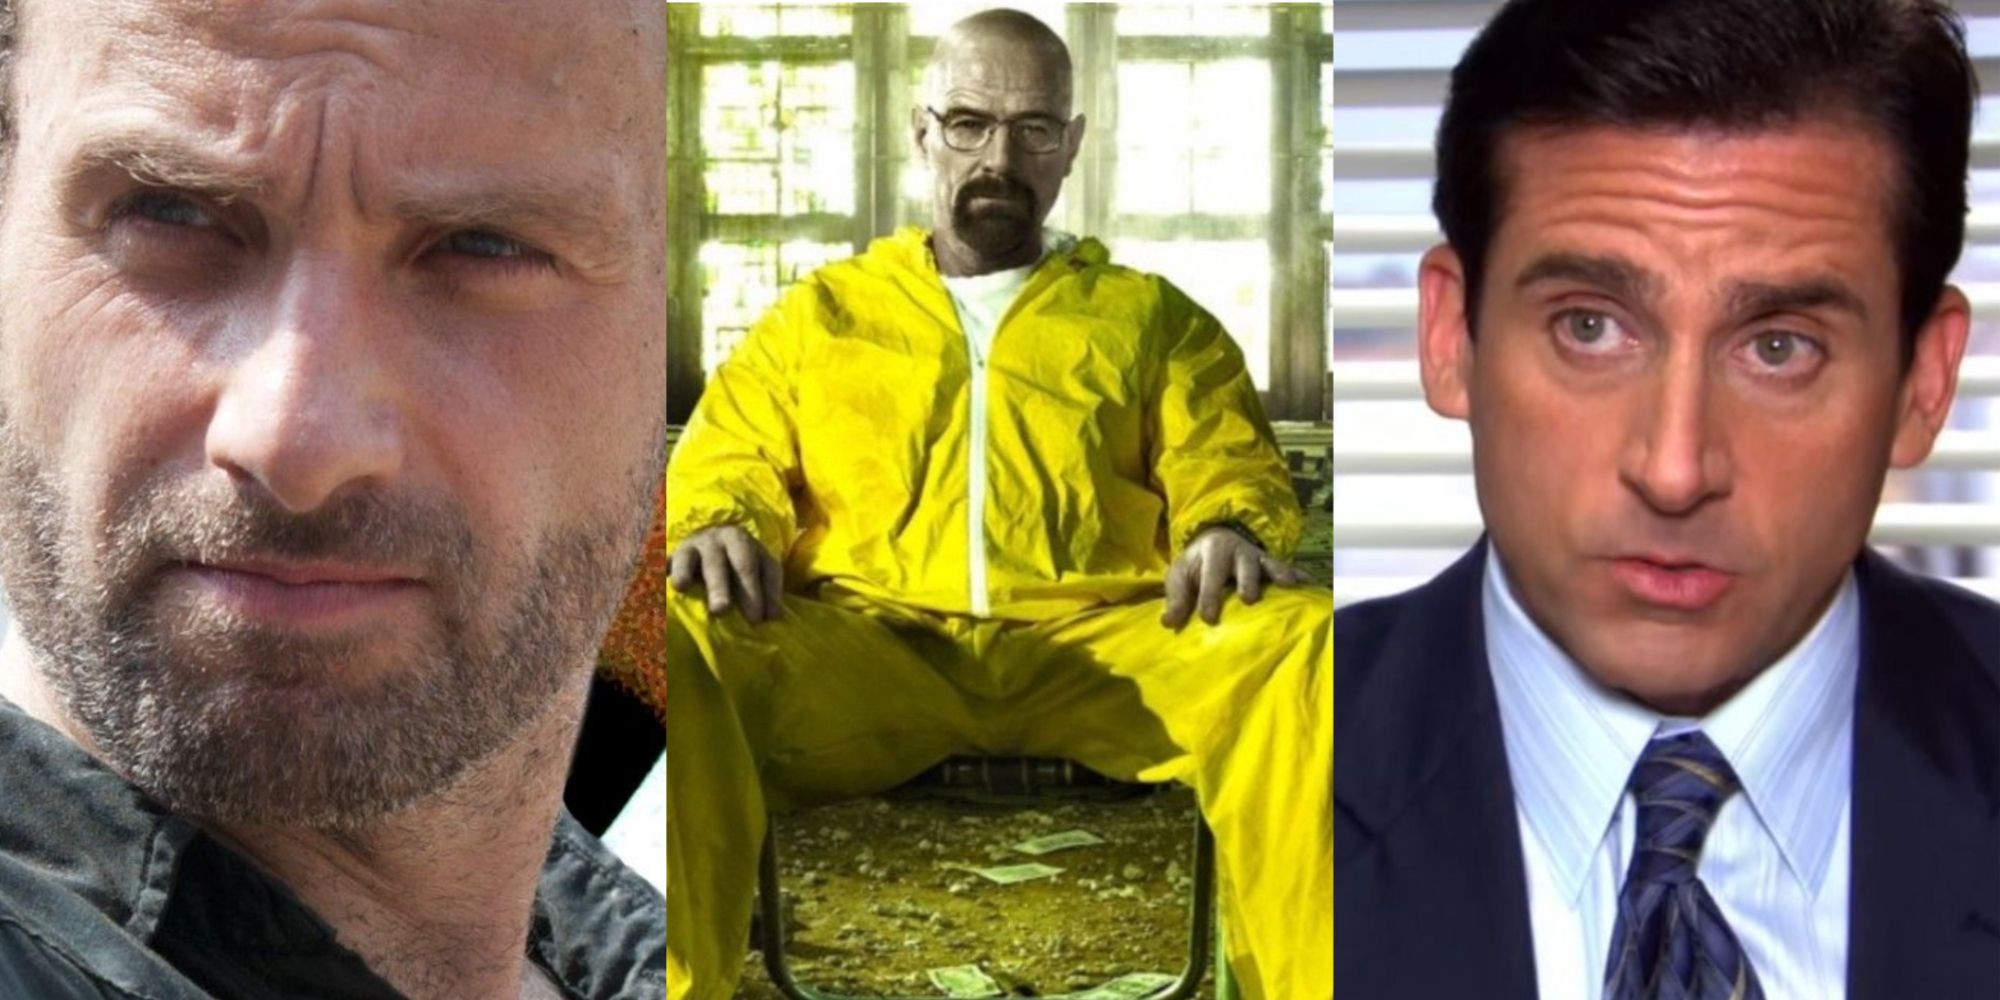 Characters from The Office Breaking Bad and The Walking Dead